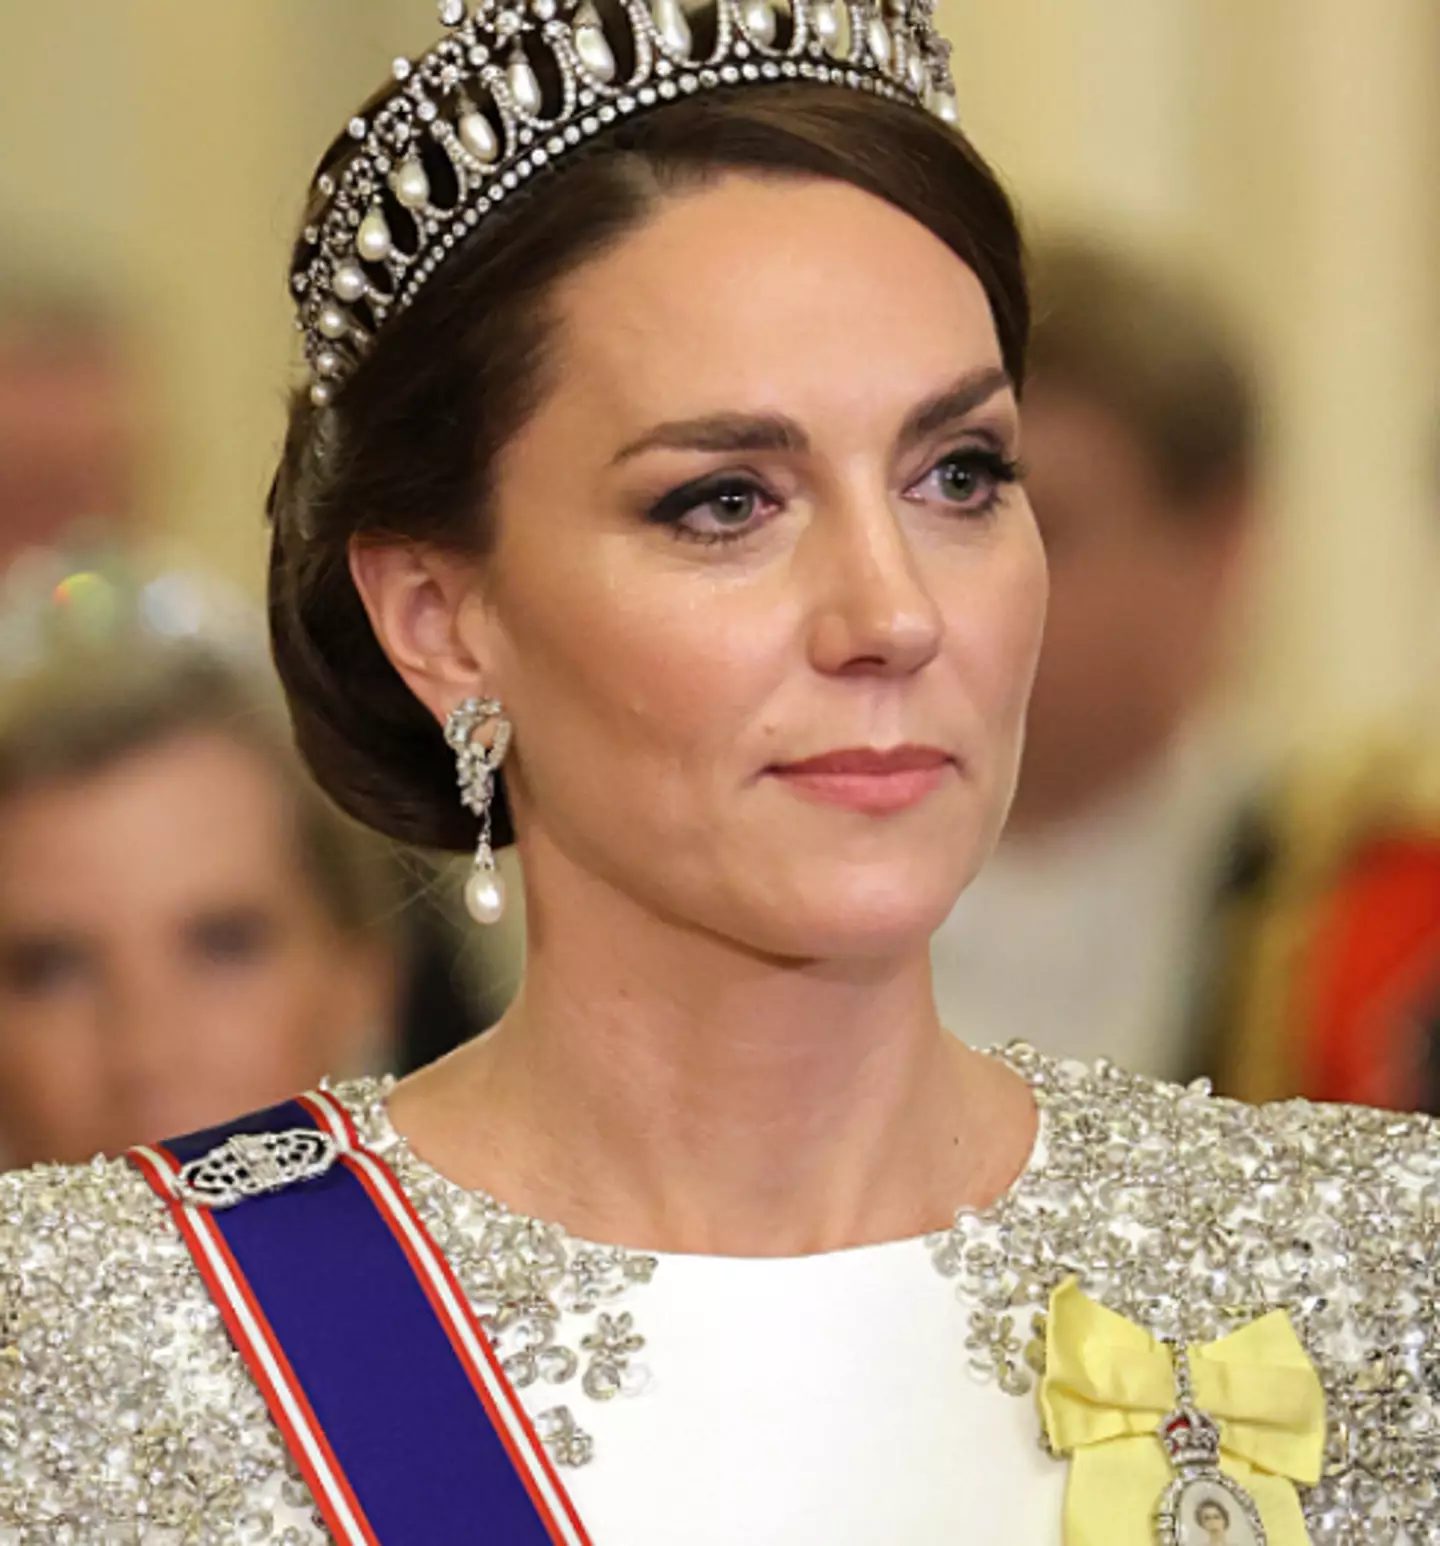 The Princess of Wales could be seen wearing the brooch at the banquet.